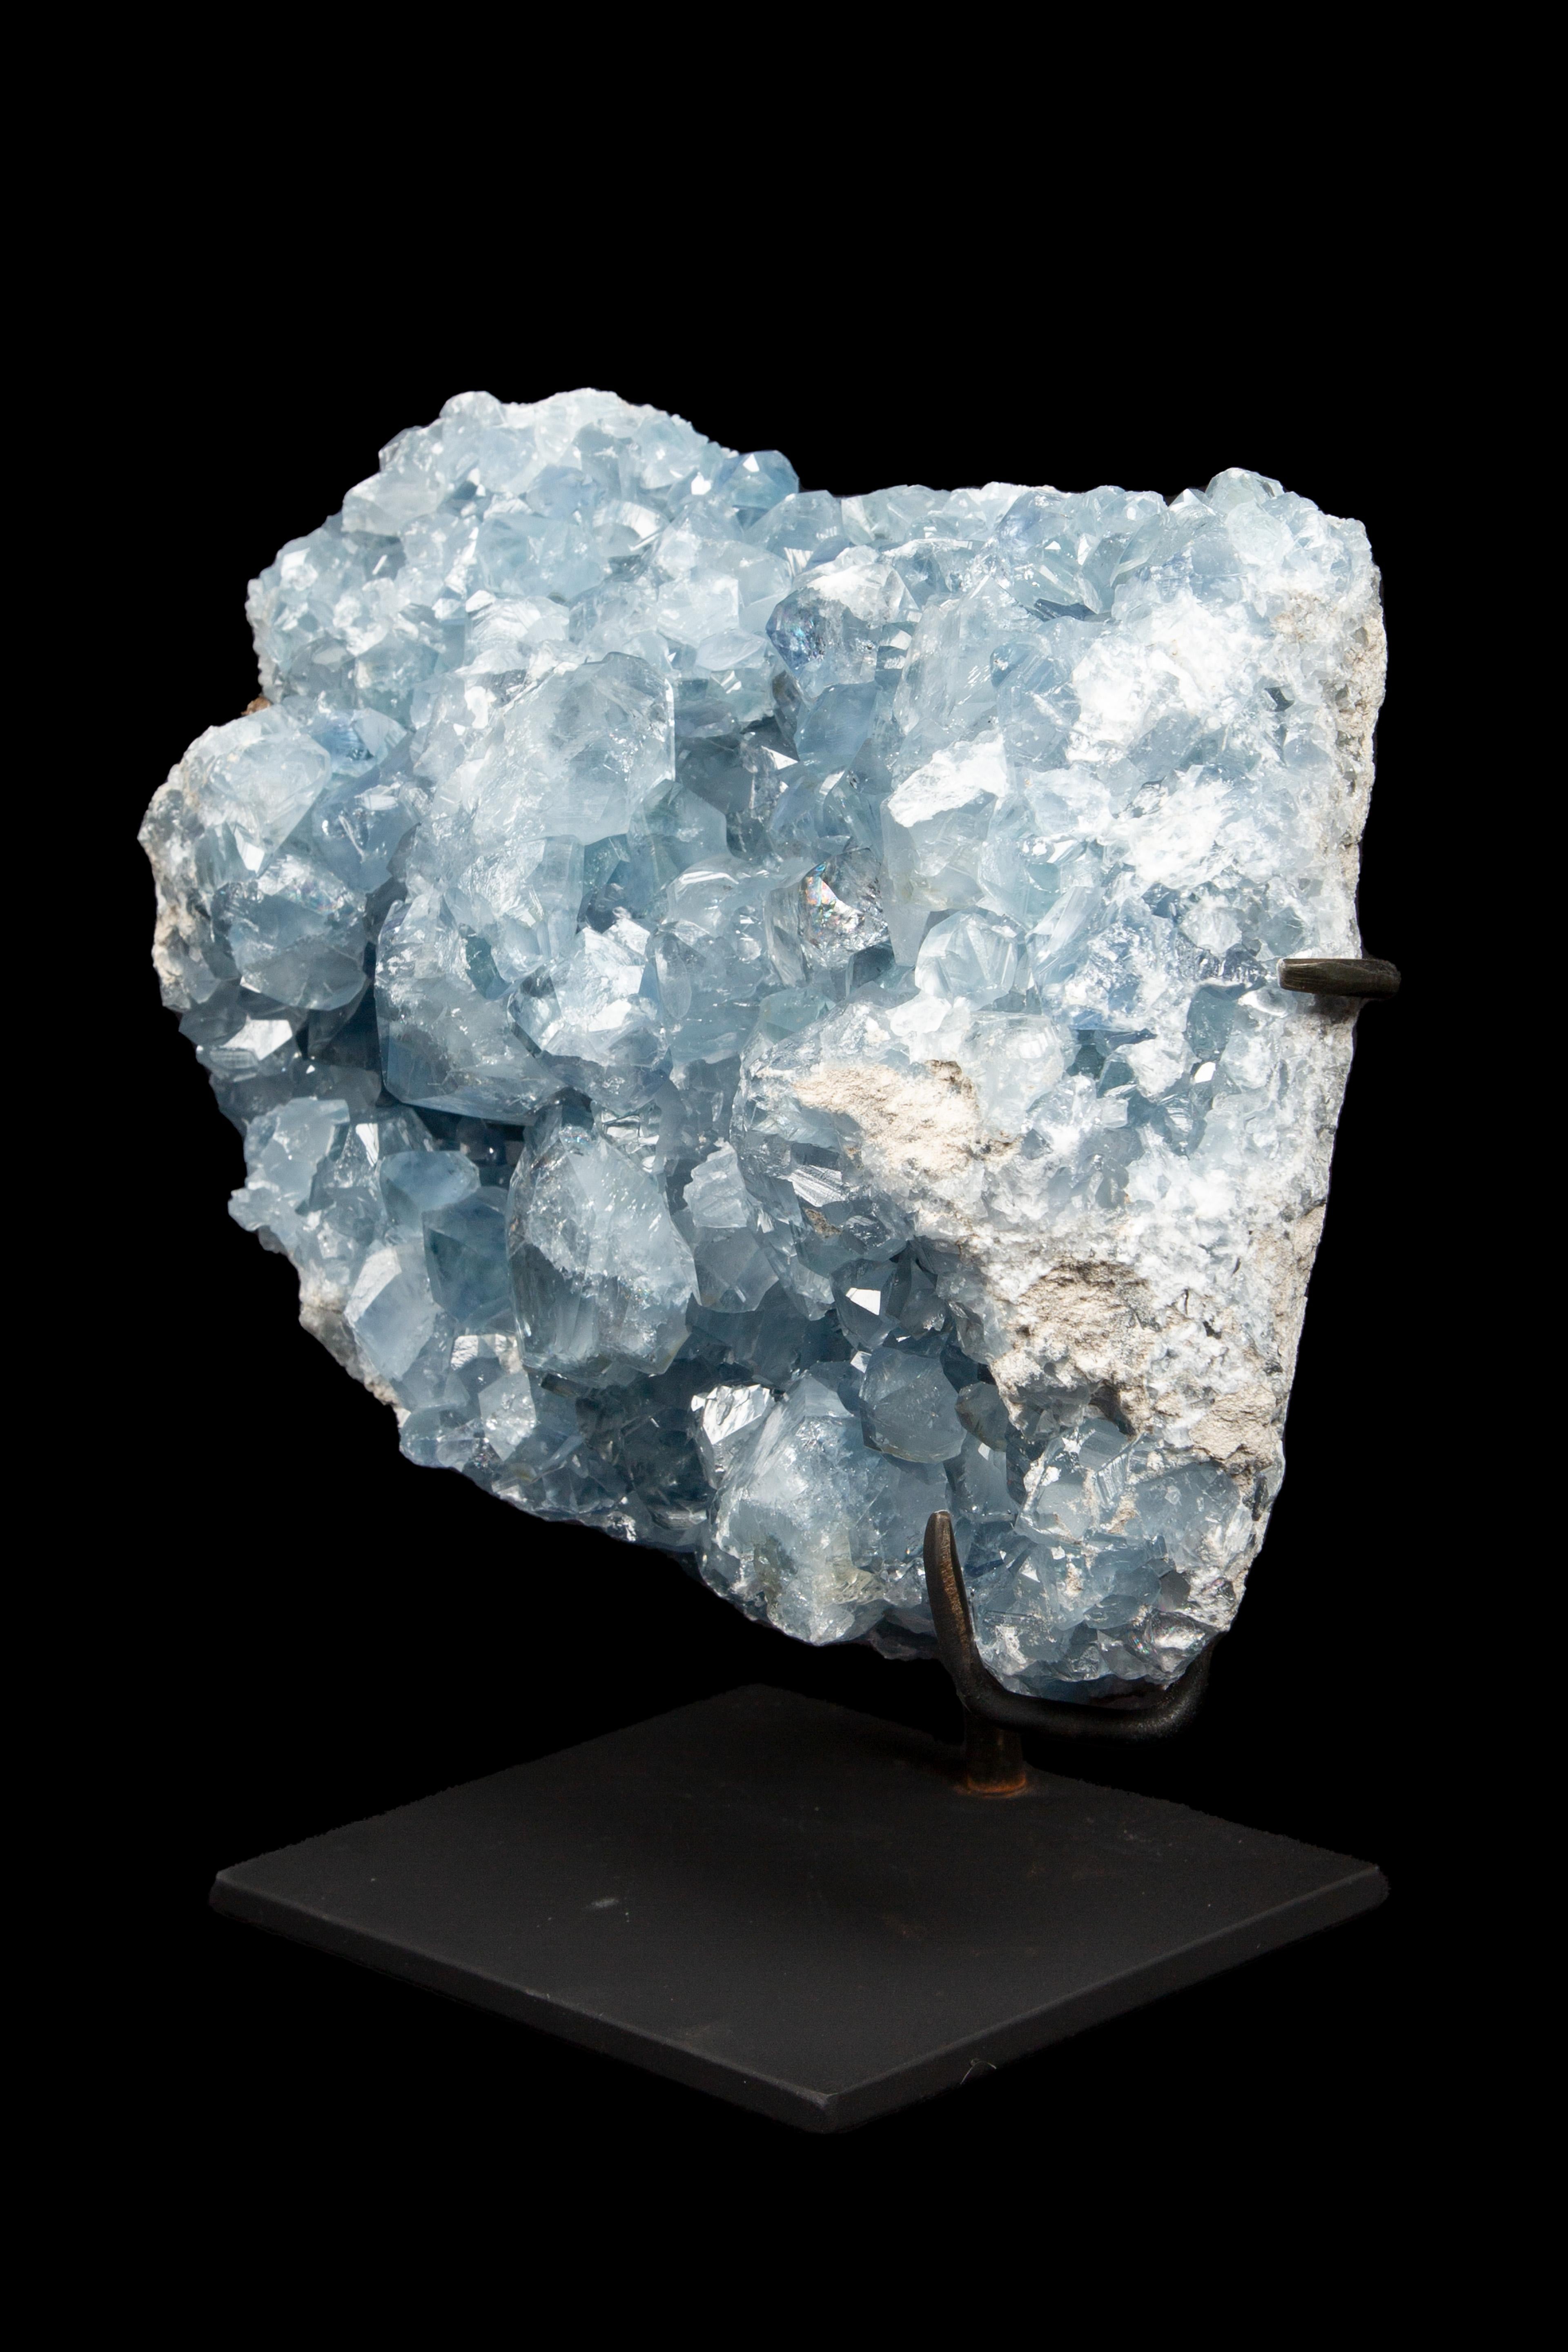 Mexican Mounted Celestial Blue Calcite Specimen: A Rarity from Mexico For Sale